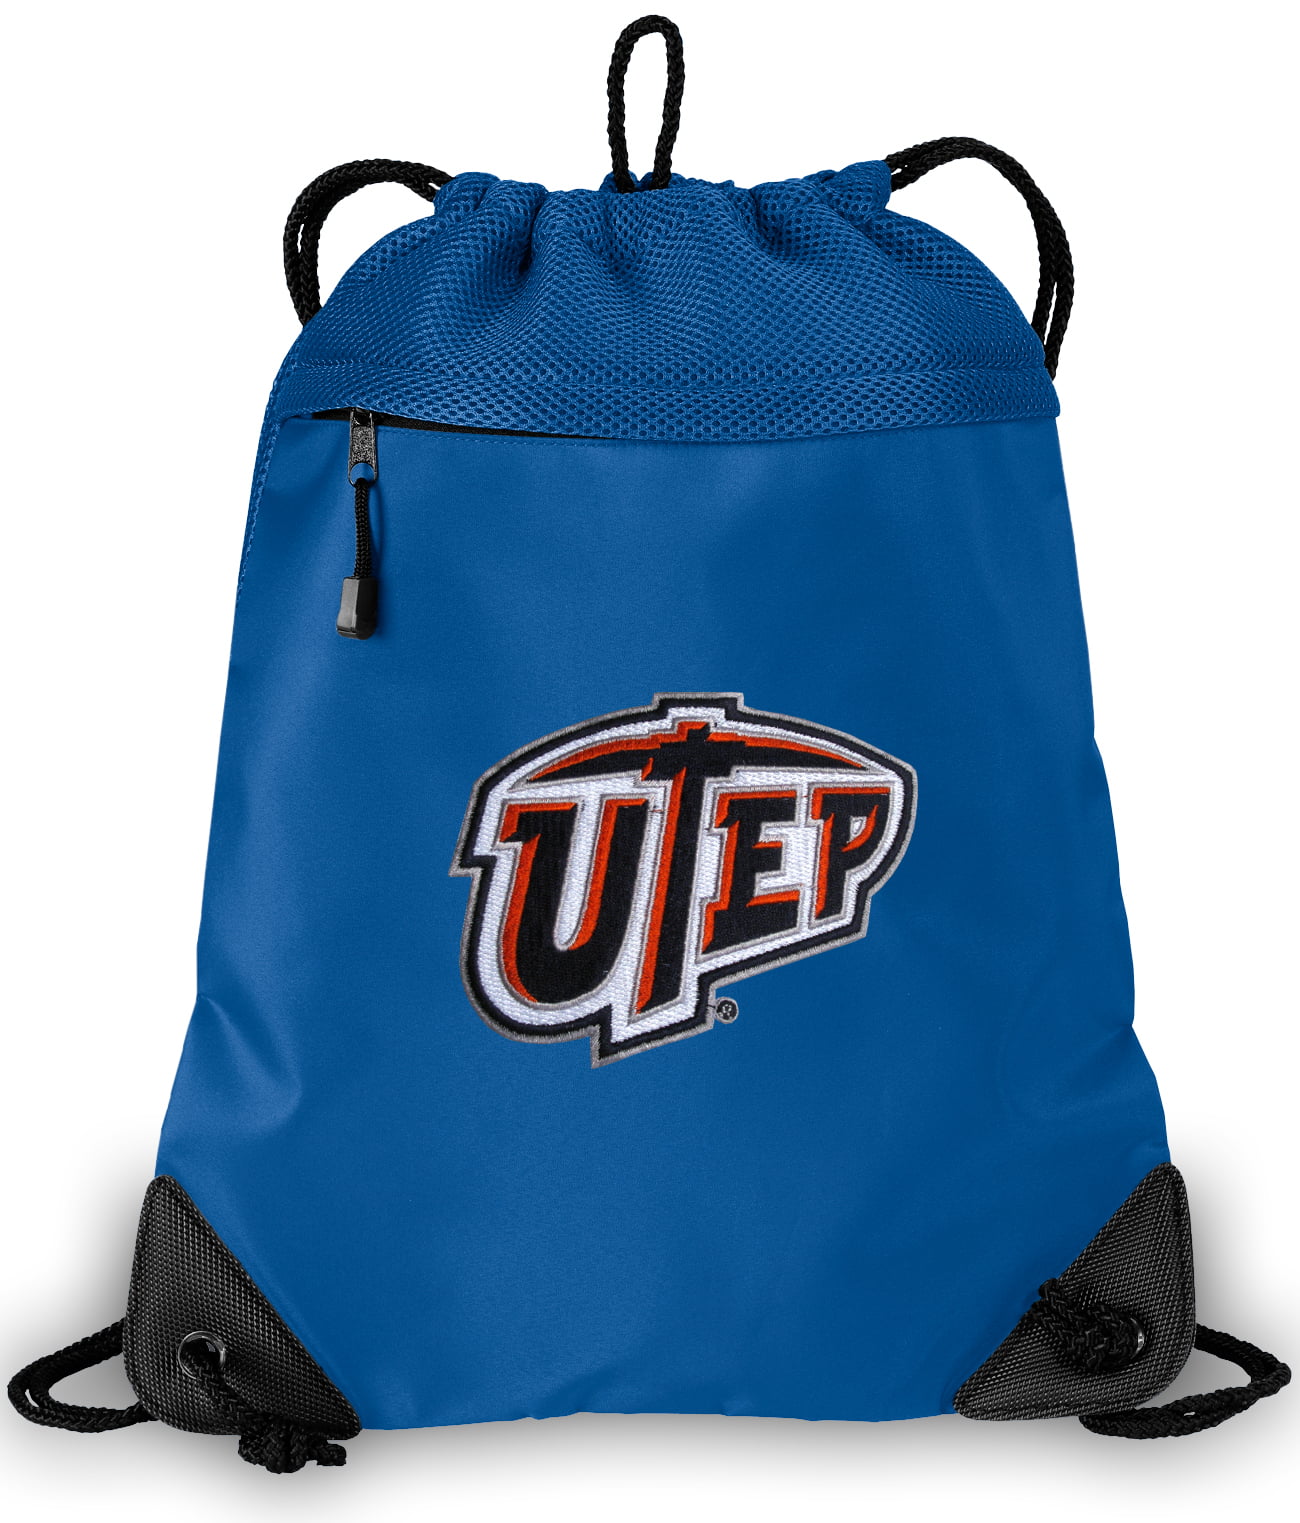 Large UTEP Miners Duffel Bag UTEP Suitcase or Gym Bag for Men Or Her 